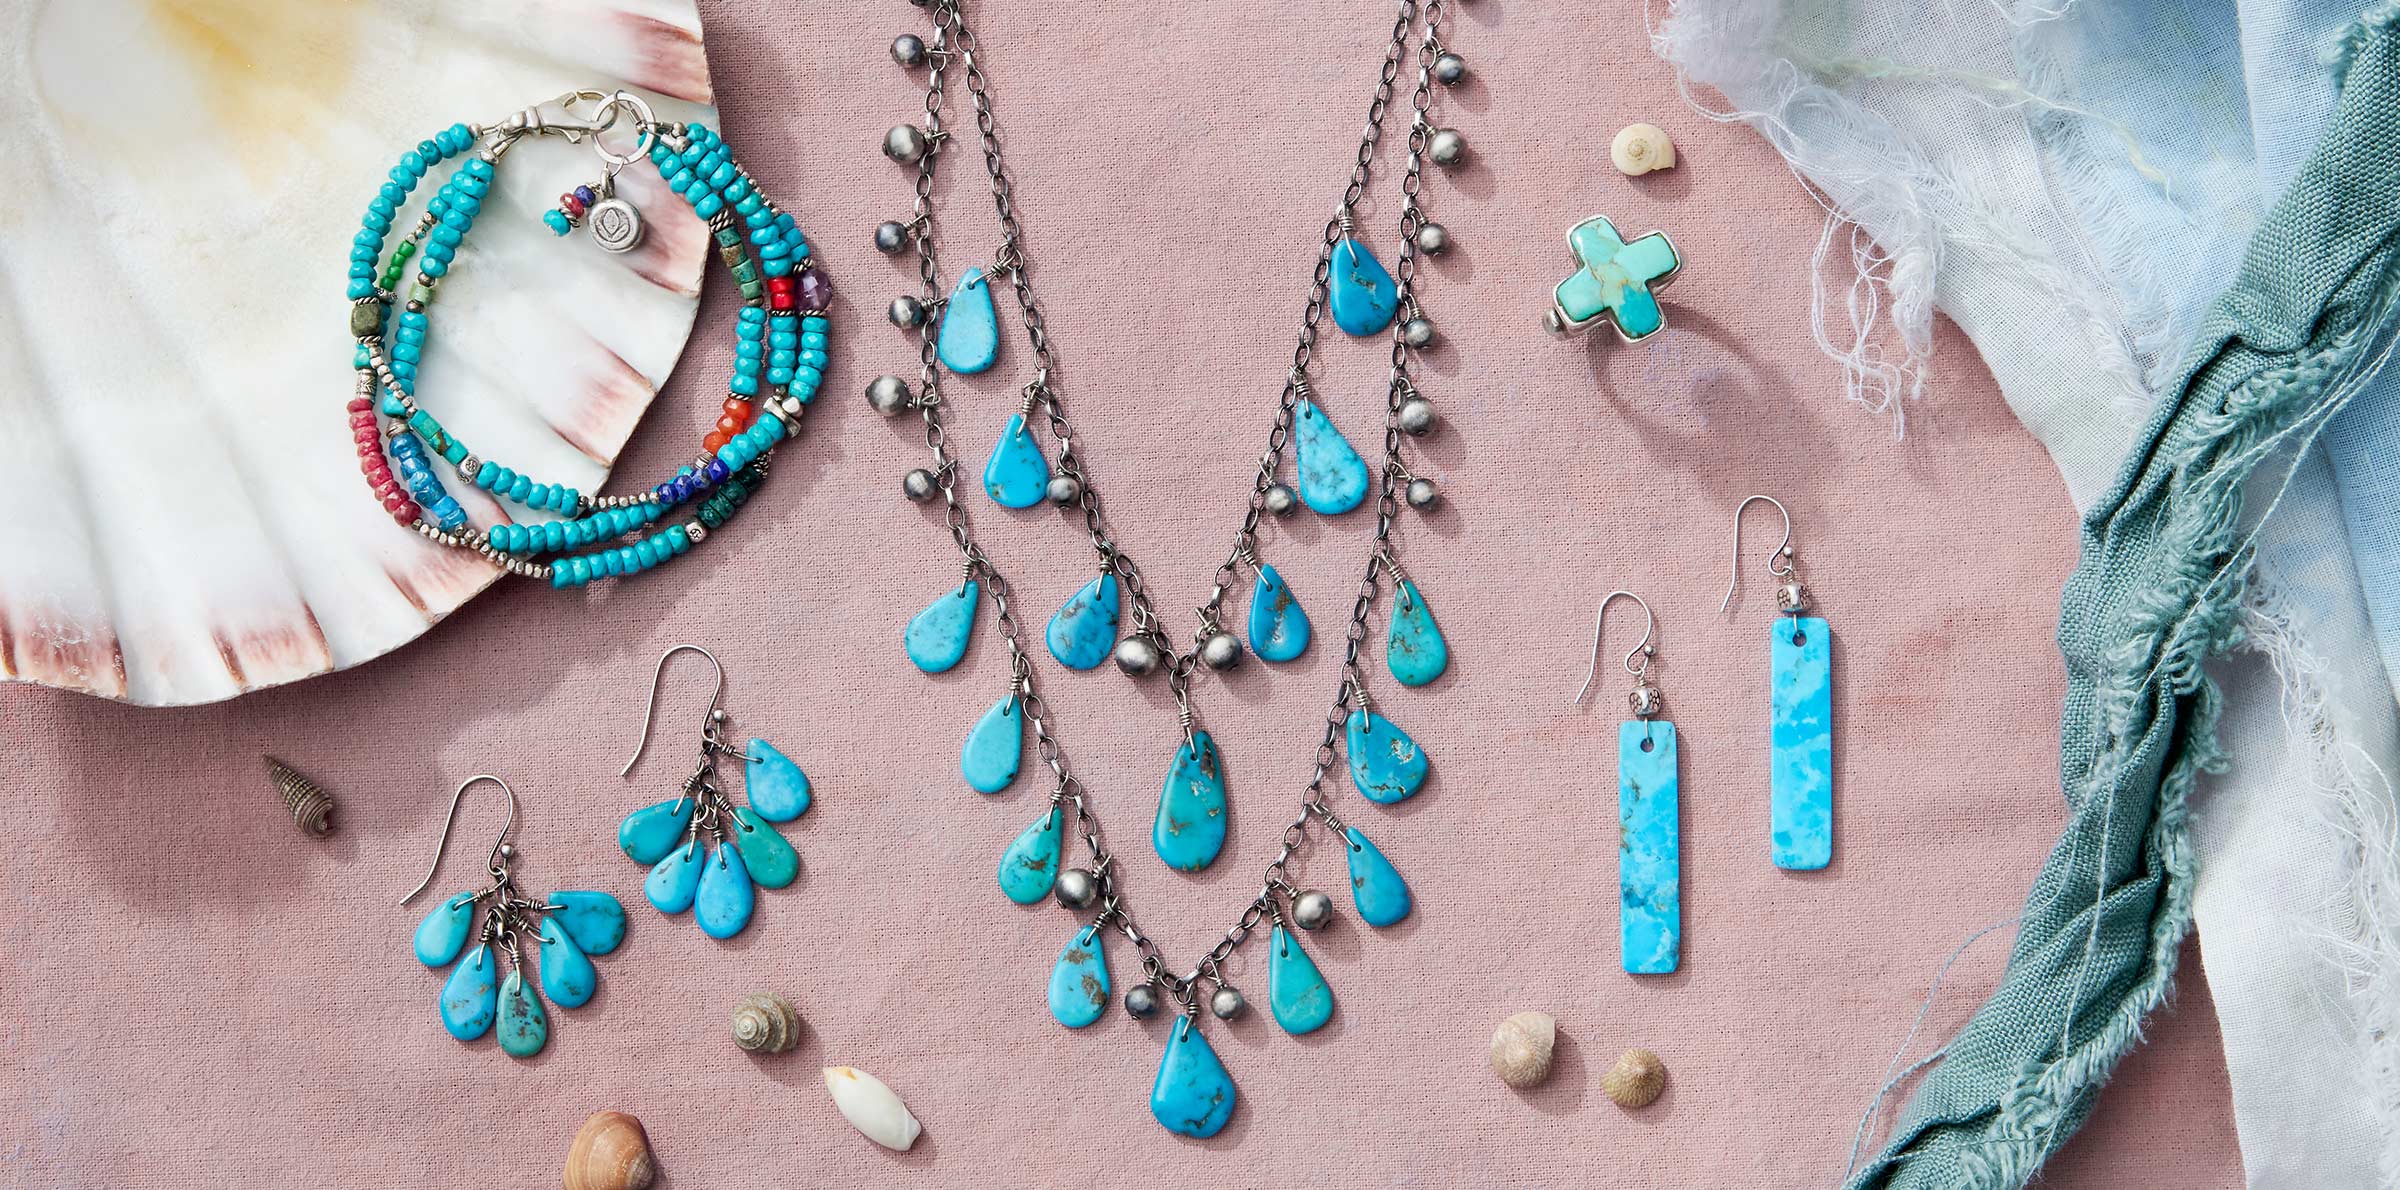 Shop Beauty of Turquoise Jewelry